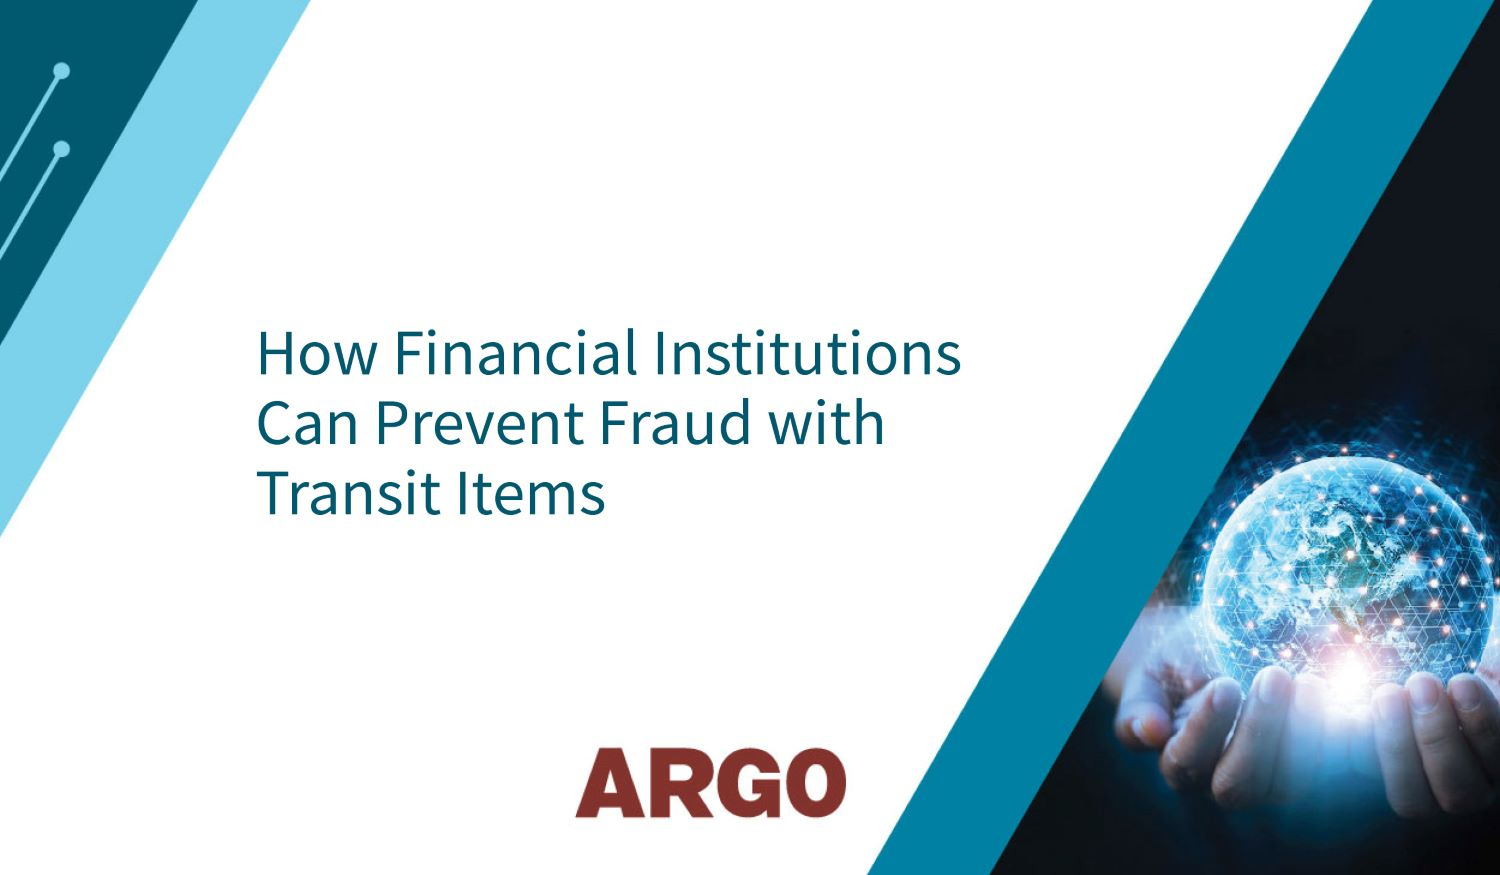 How Financial Institutions can Prevent Fraud with Transit Items